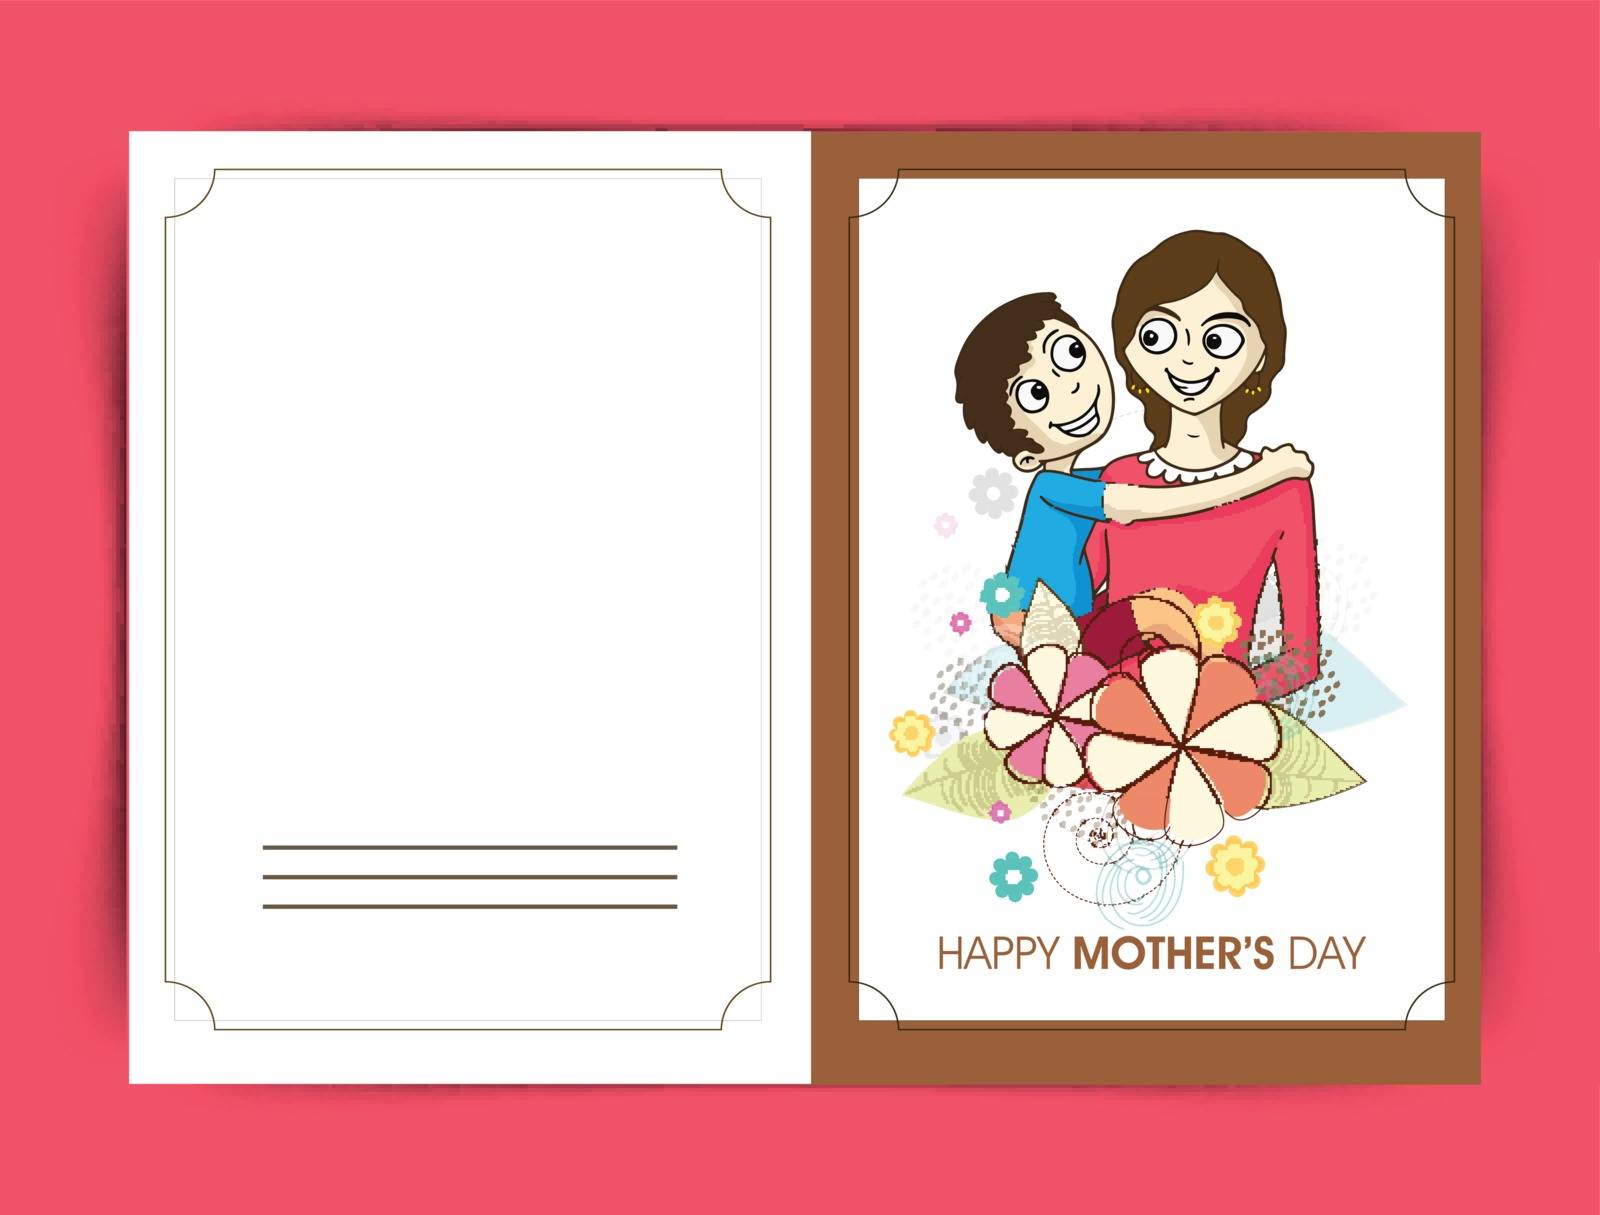 Greeting Card for Happy Mother's Day. by aispl